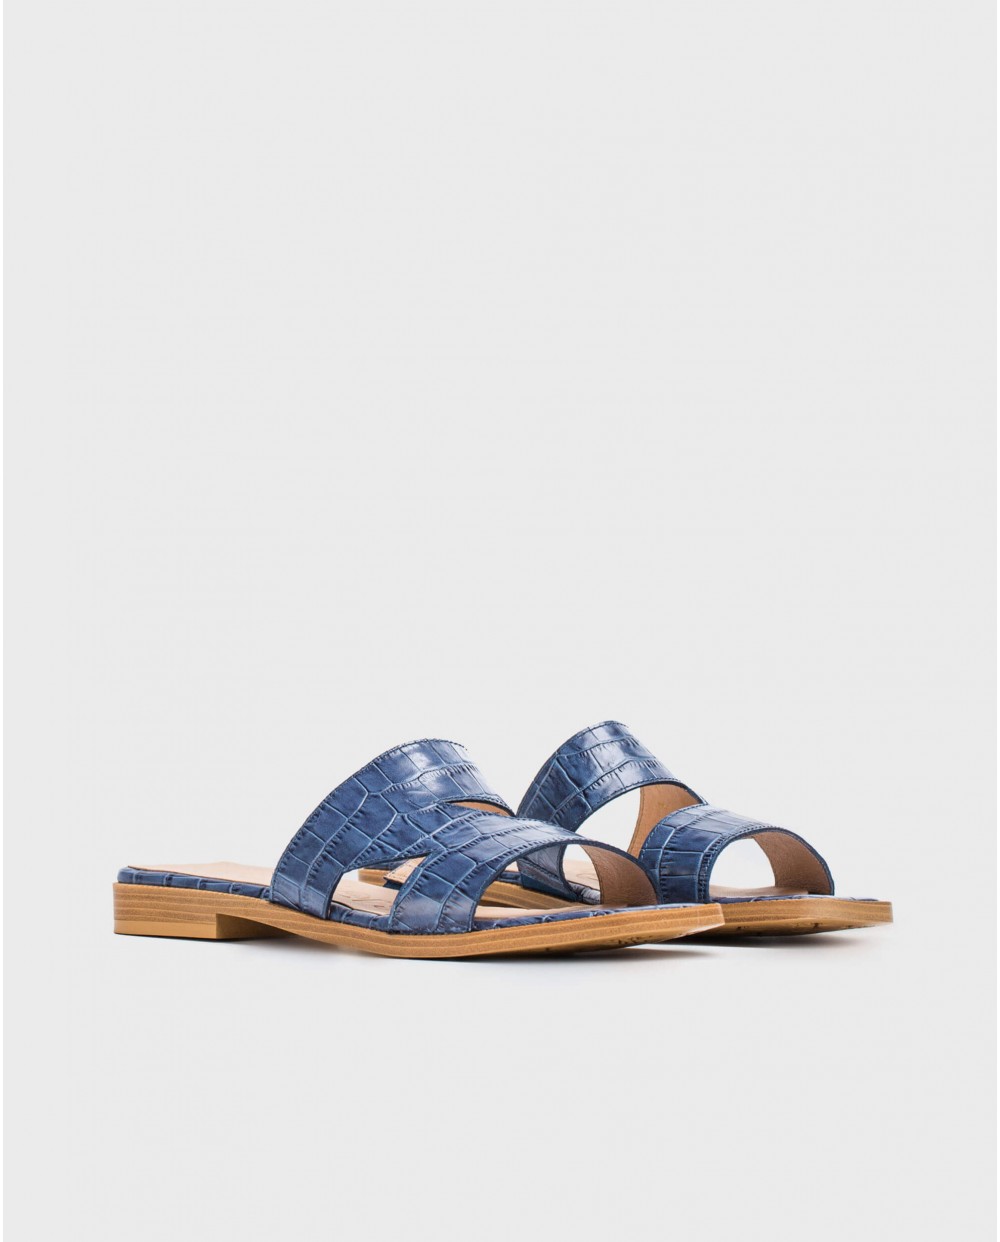 Wonders-Flat Shoes-Leather flat sandal with side cutouts